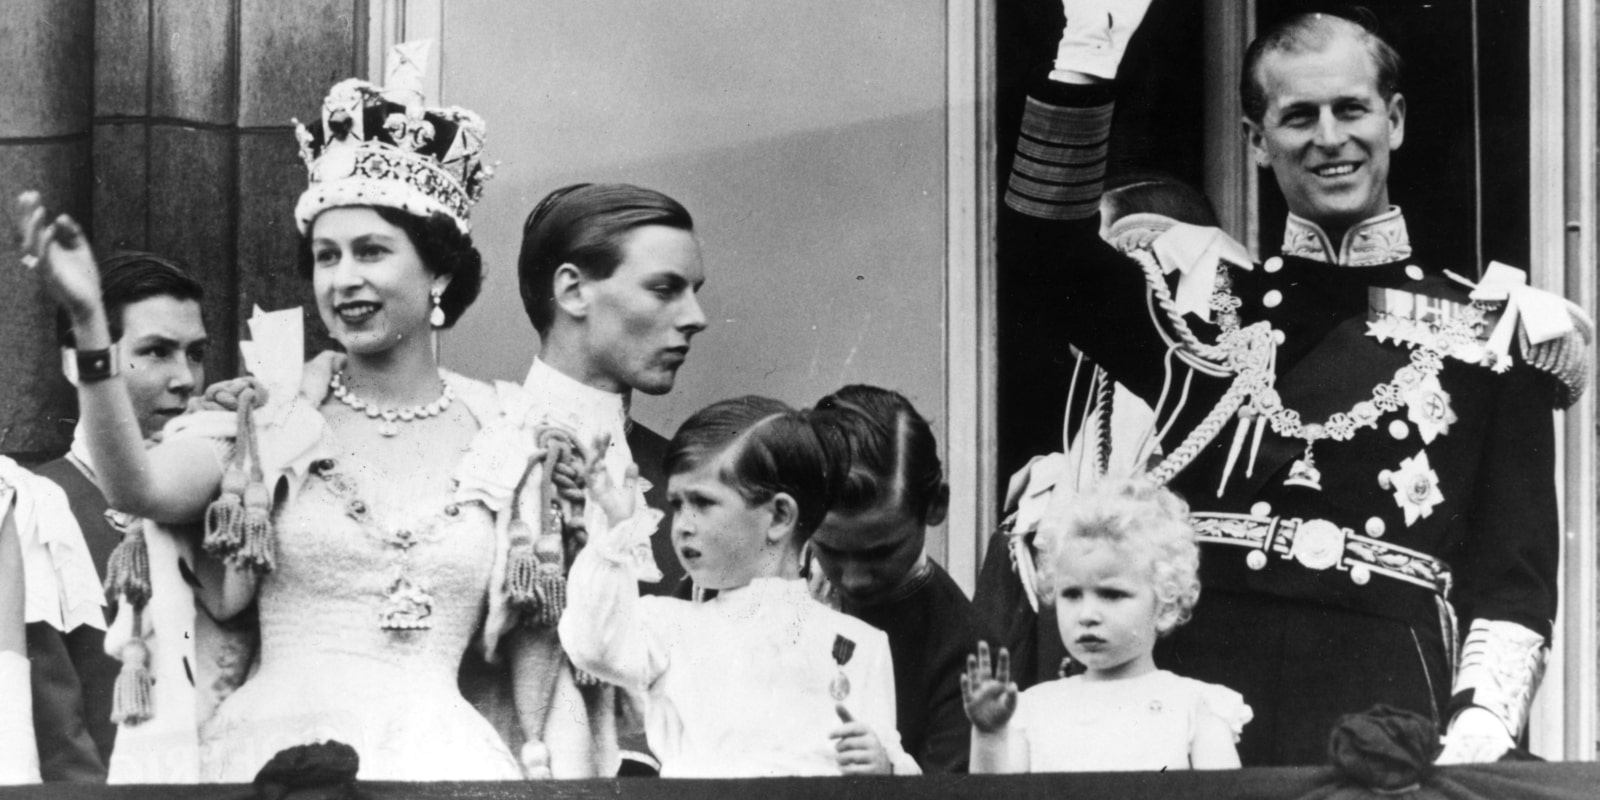 Queen Elizabeth wanted her son Charles to feel special on her coronation, so she gifted him with his own special invitiatoin.